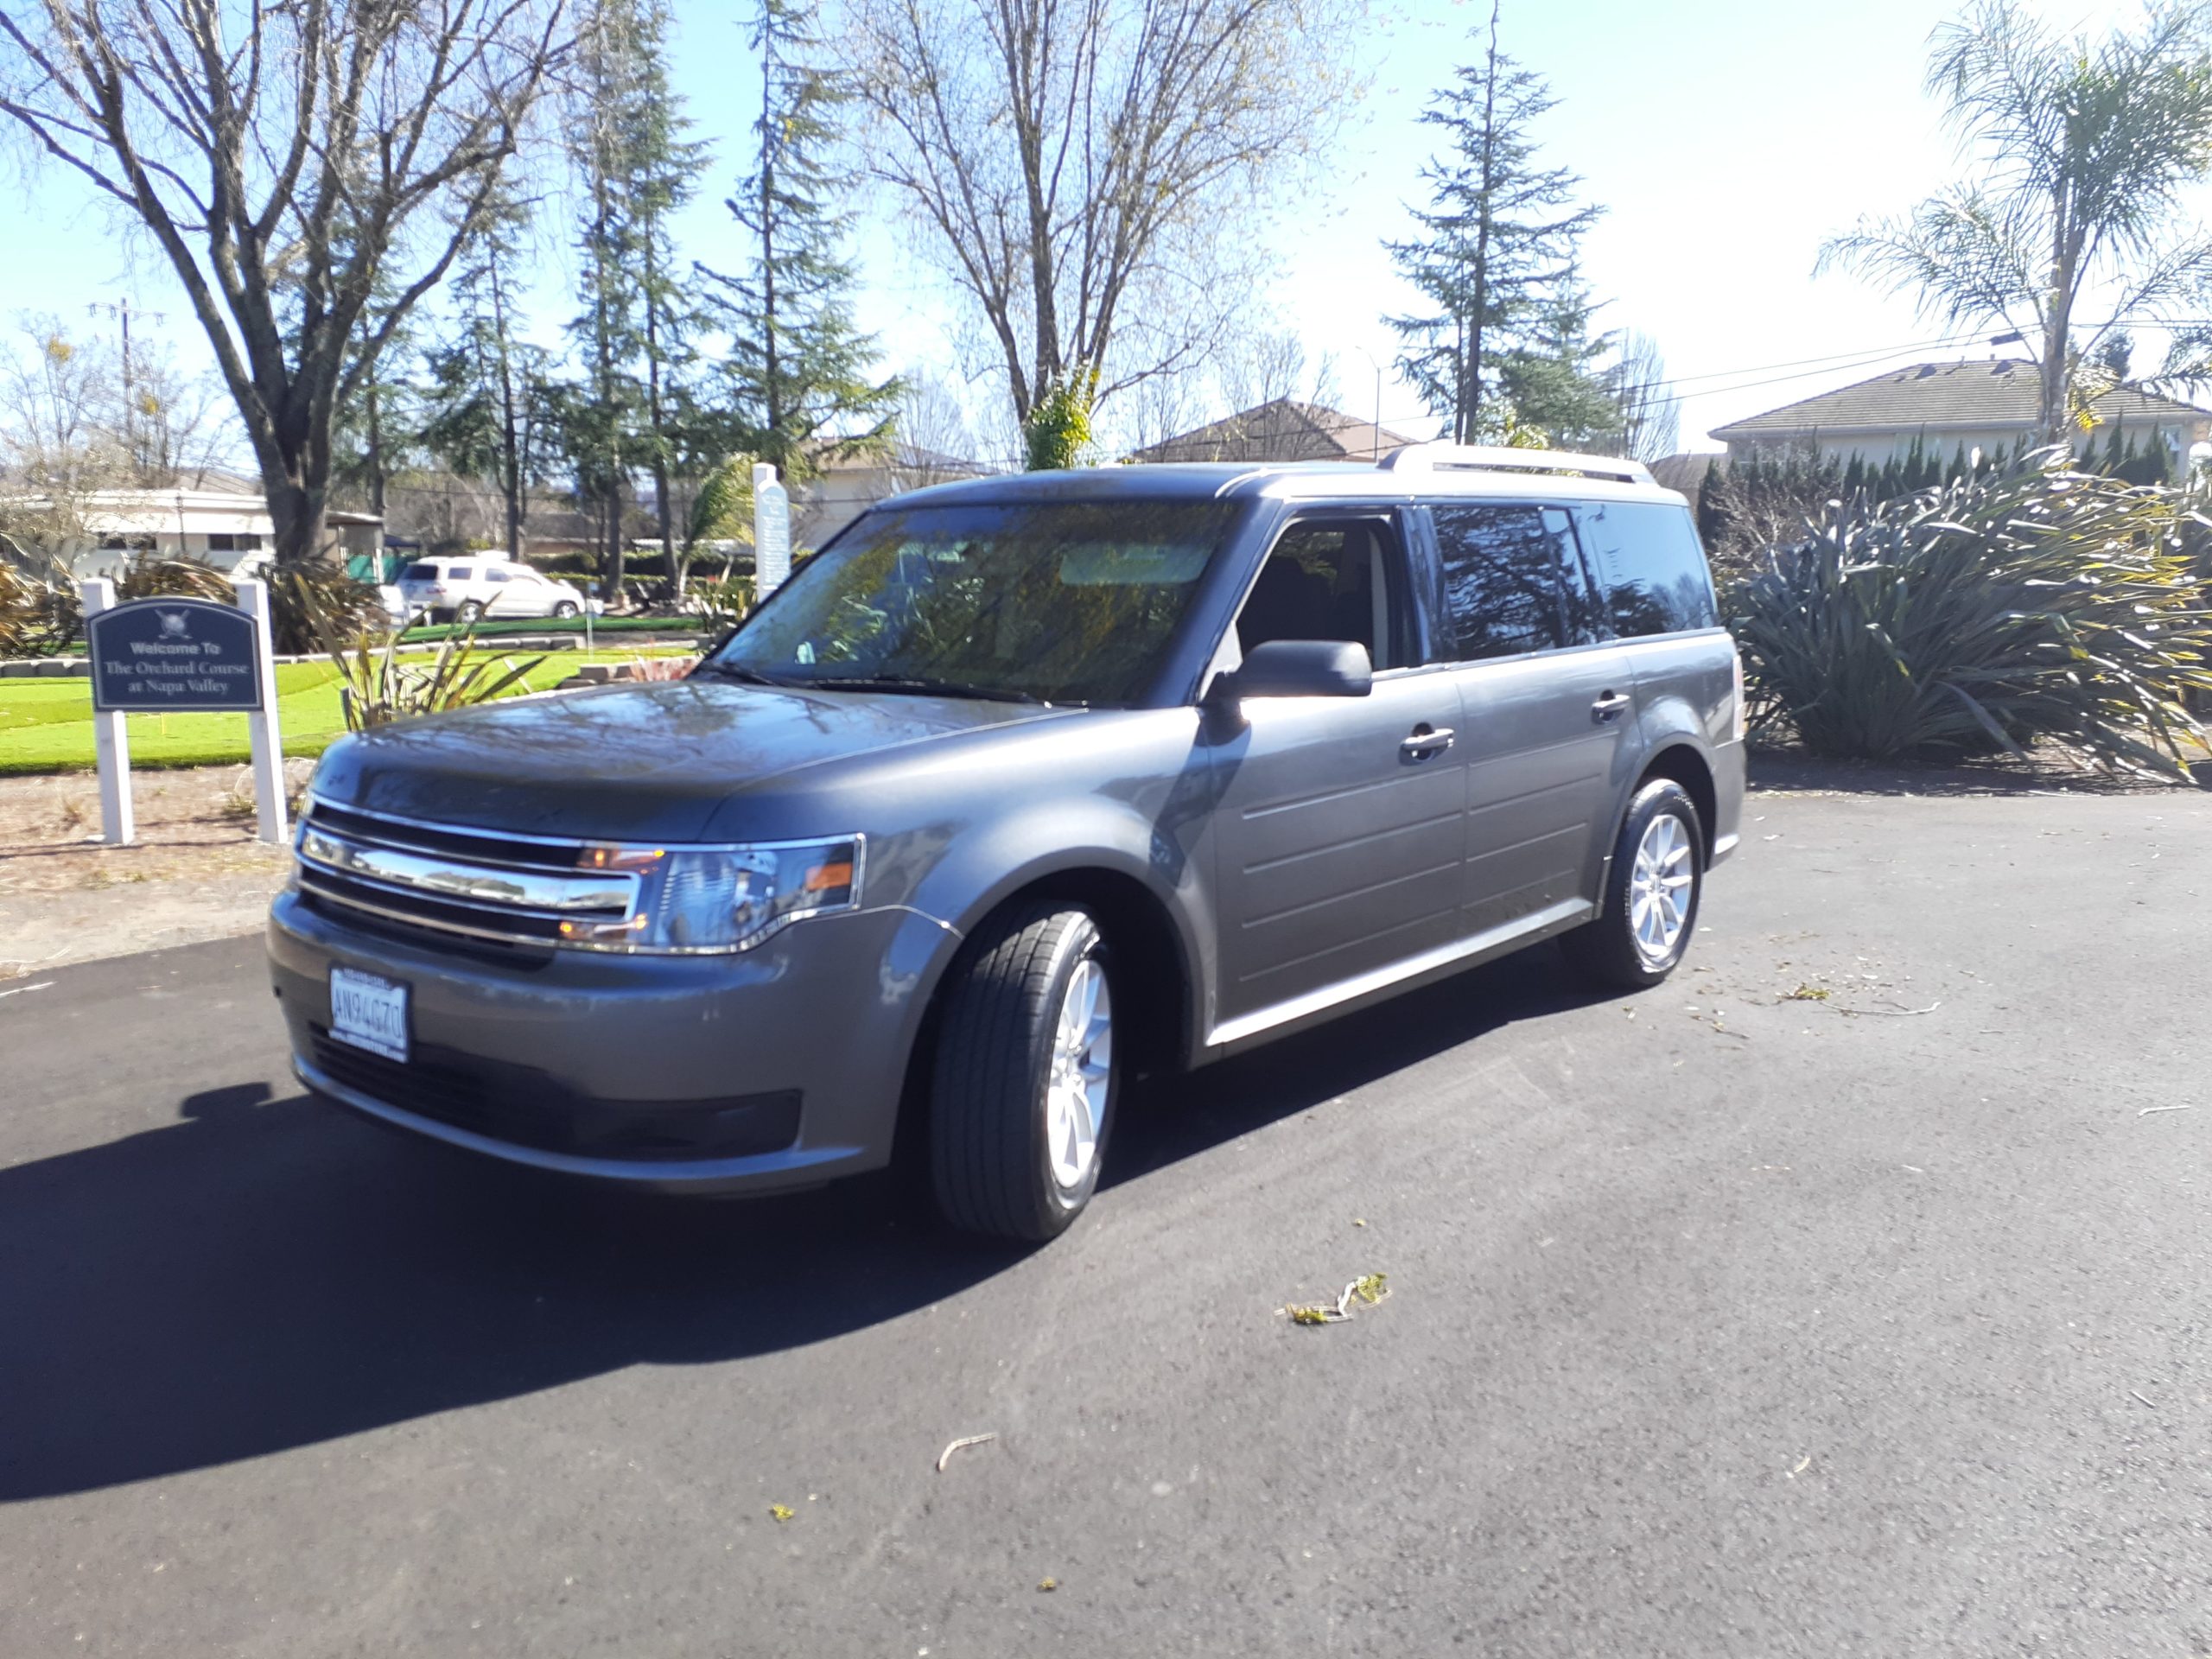 Ford Flex SUV $75 an hour with a 6 hour minimum and 20% gratity for the driver!